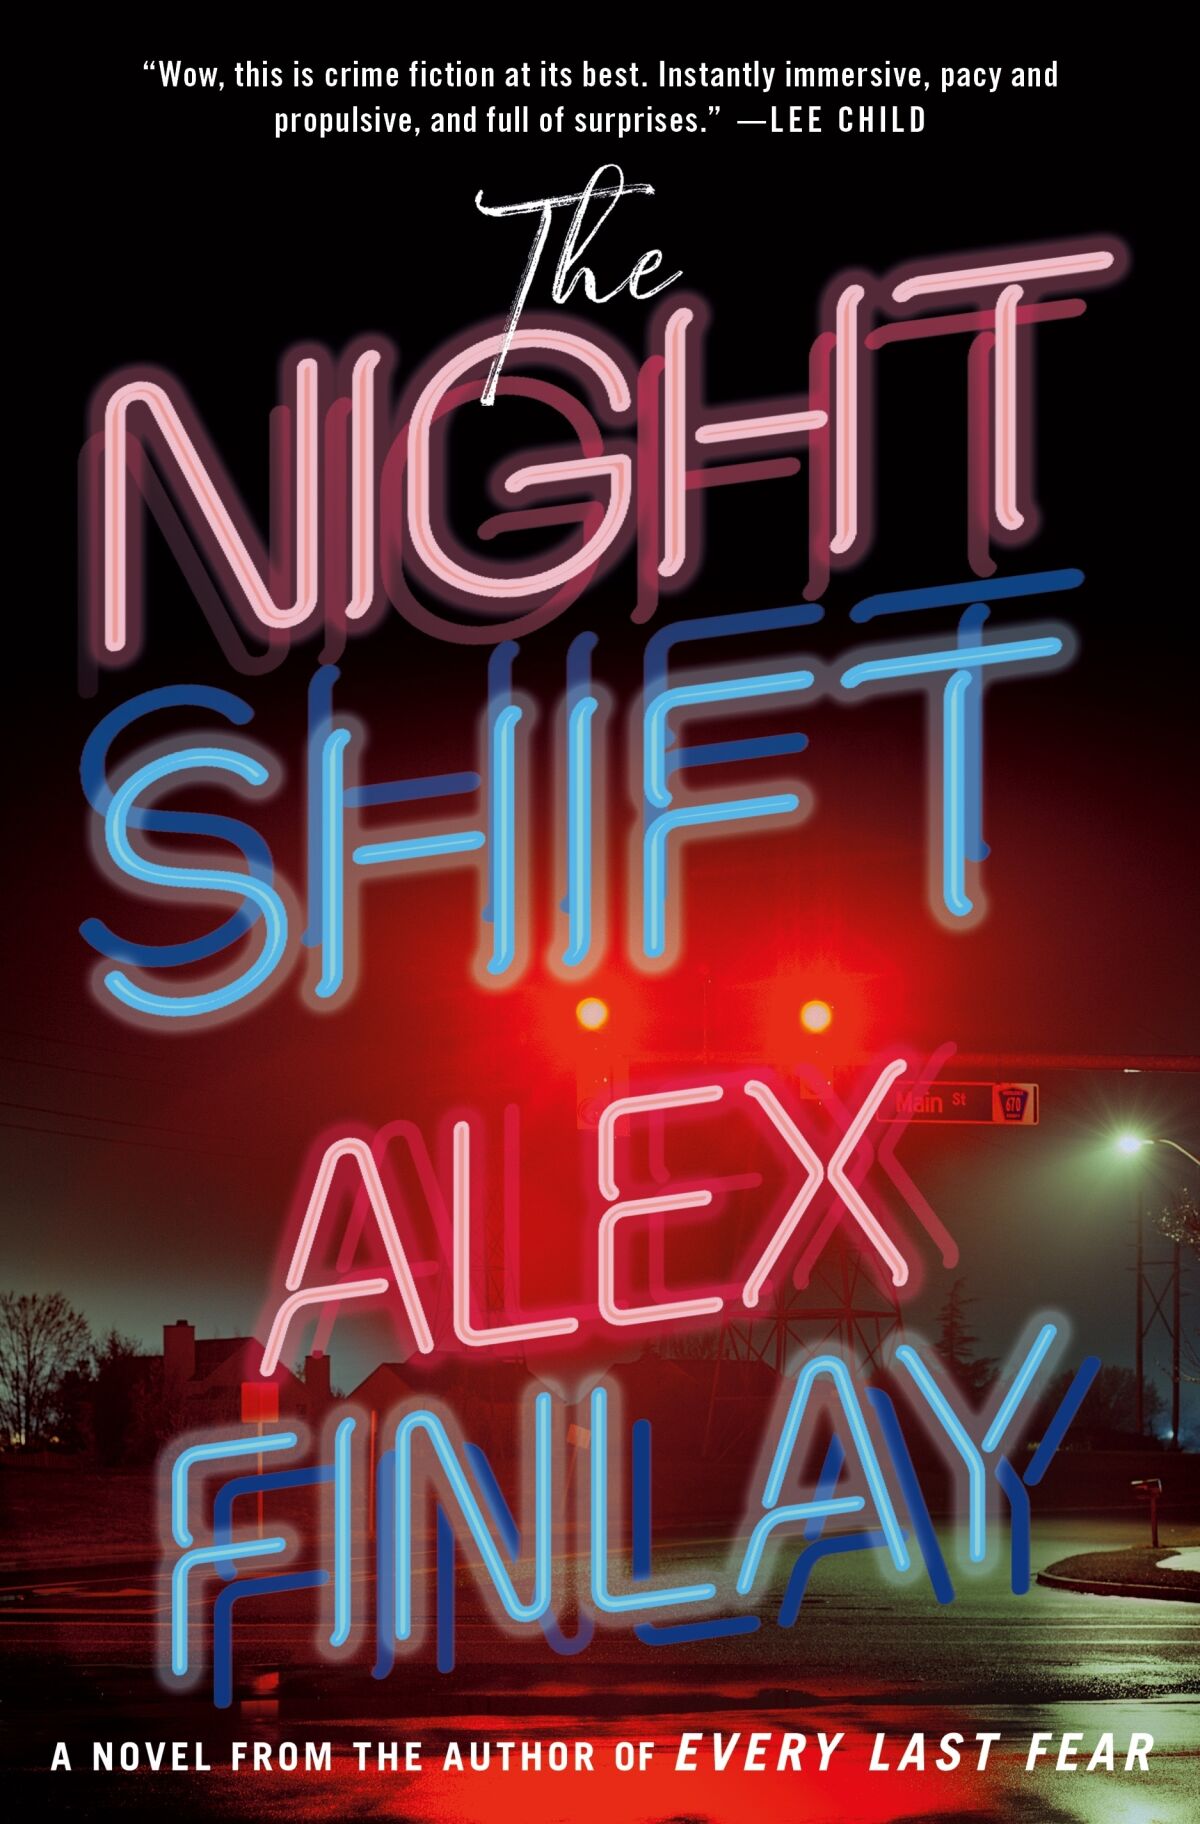 This cover image released by Minotaur shows "The Night Shift" by Alex Finlay. (Minotaur via AP)